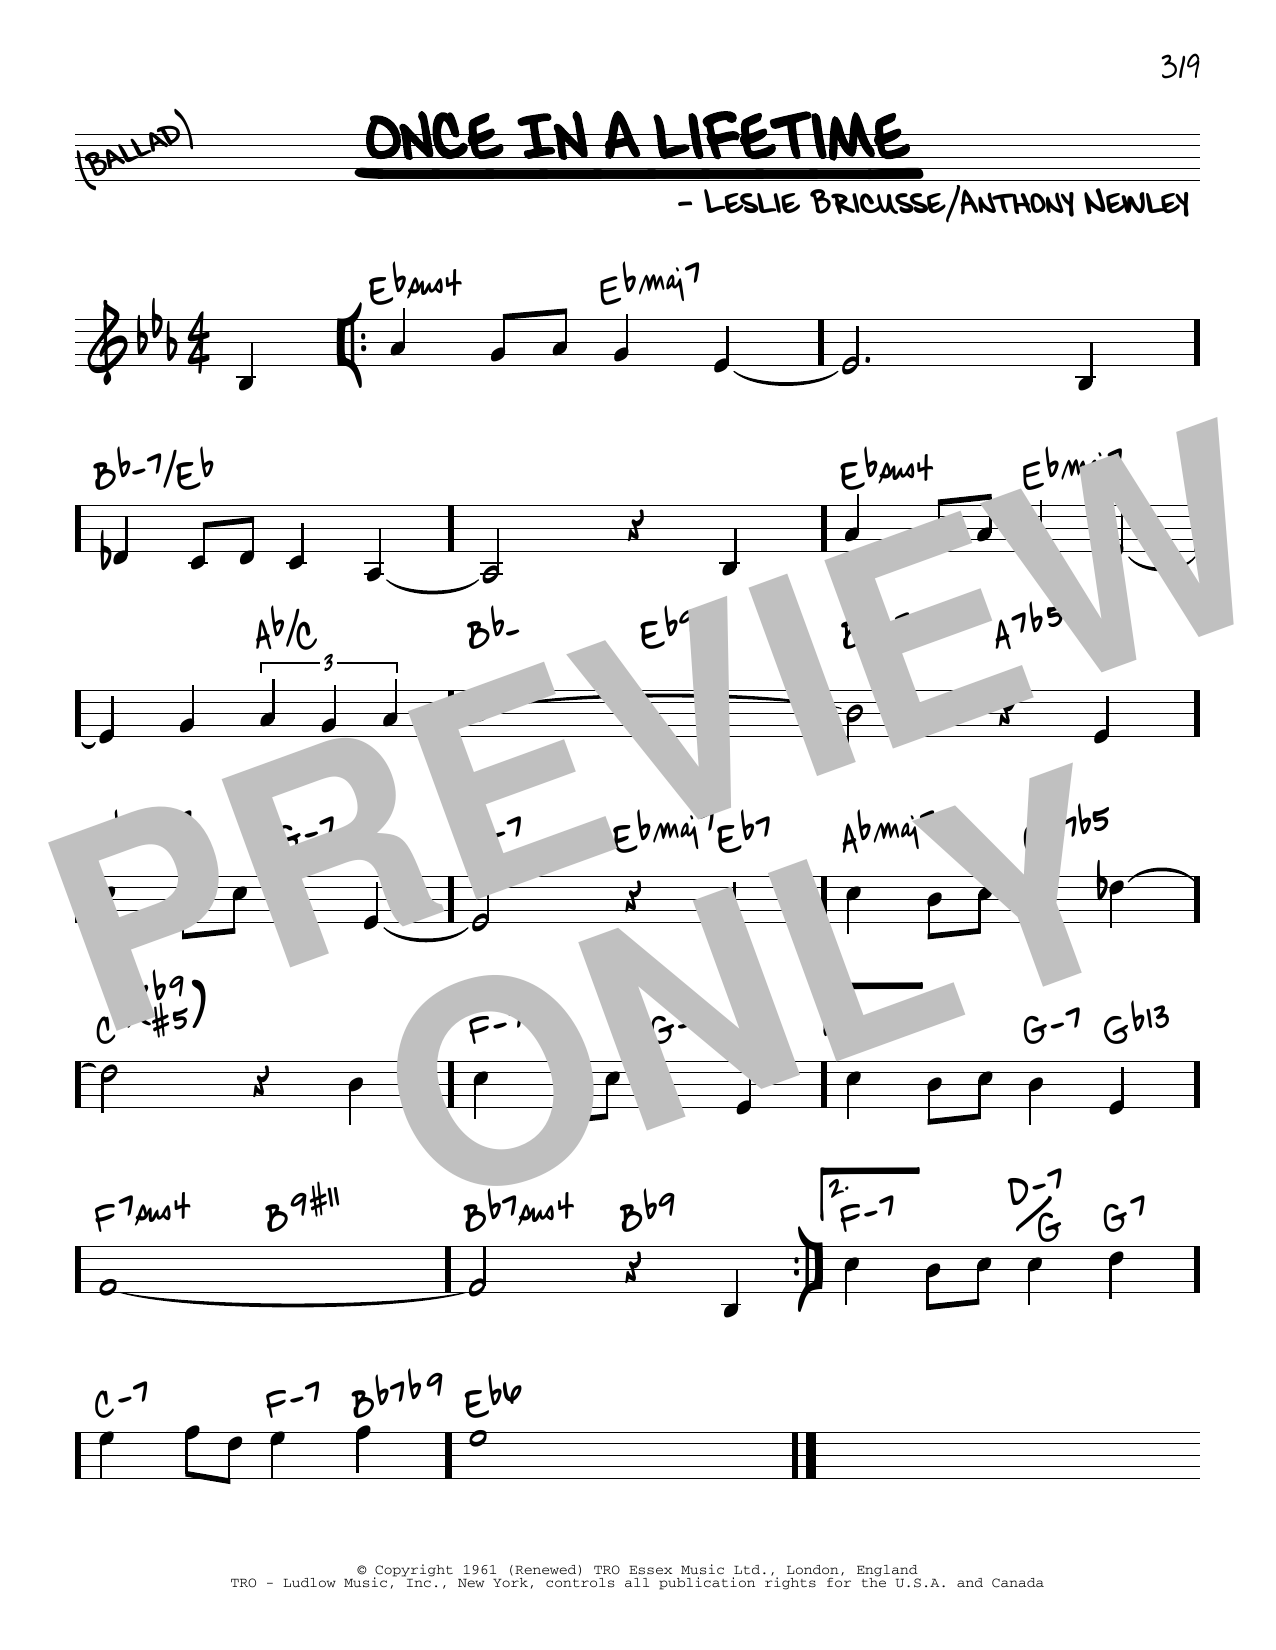 Download Leslie Bricusse and Anthony Newley Once In A Lifetime Sheet Music